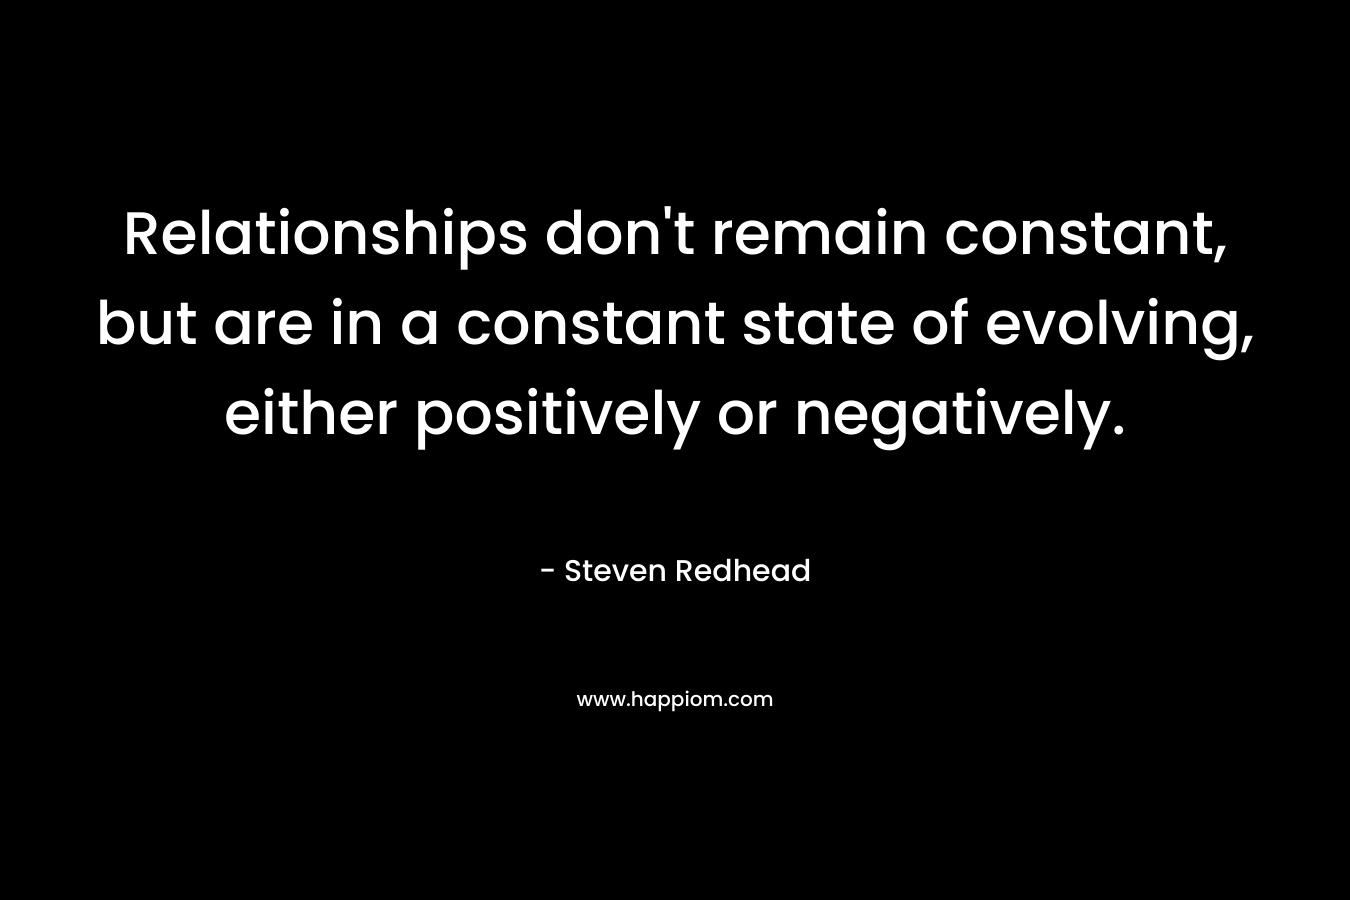 Relationships don’t remain constant, but are in a constant state of evolving, either positively or negatively. – Steven Redhead